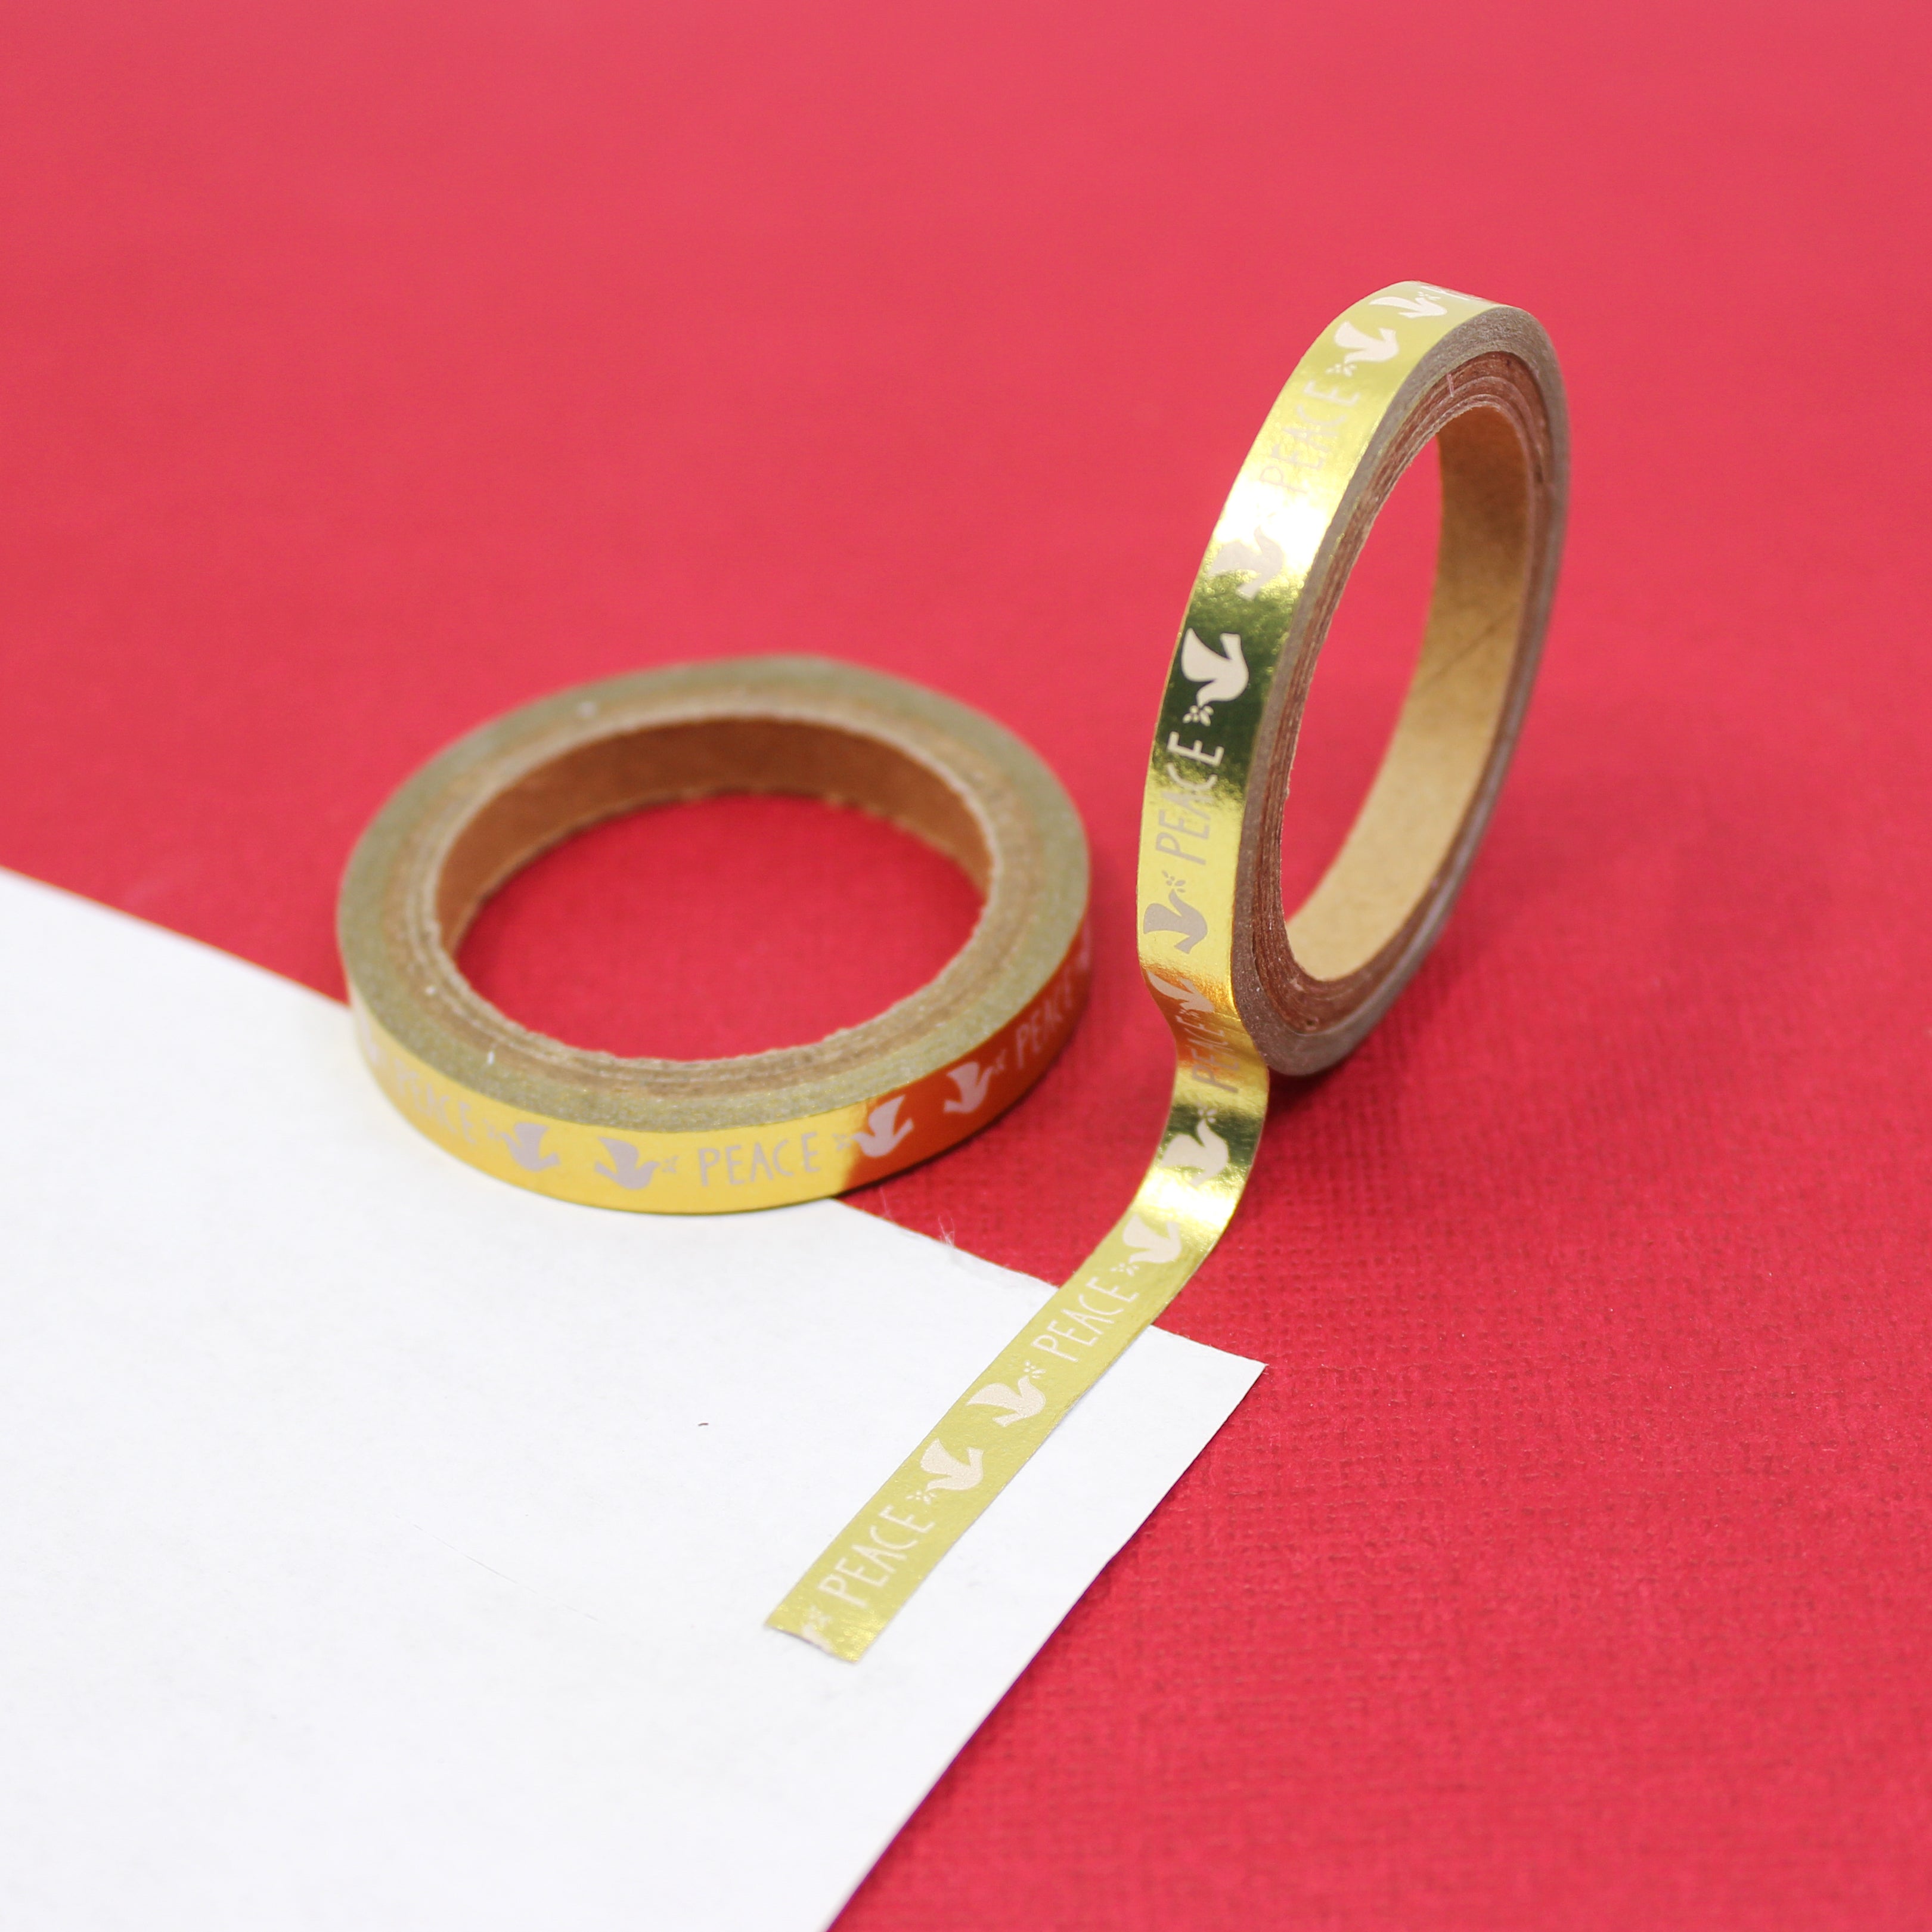 This beautiful gold foil tape is perfect for your holiday craft projects and spread. This tape features doves and peace text. This tape is sold at BBB Supplies Craft Shop.